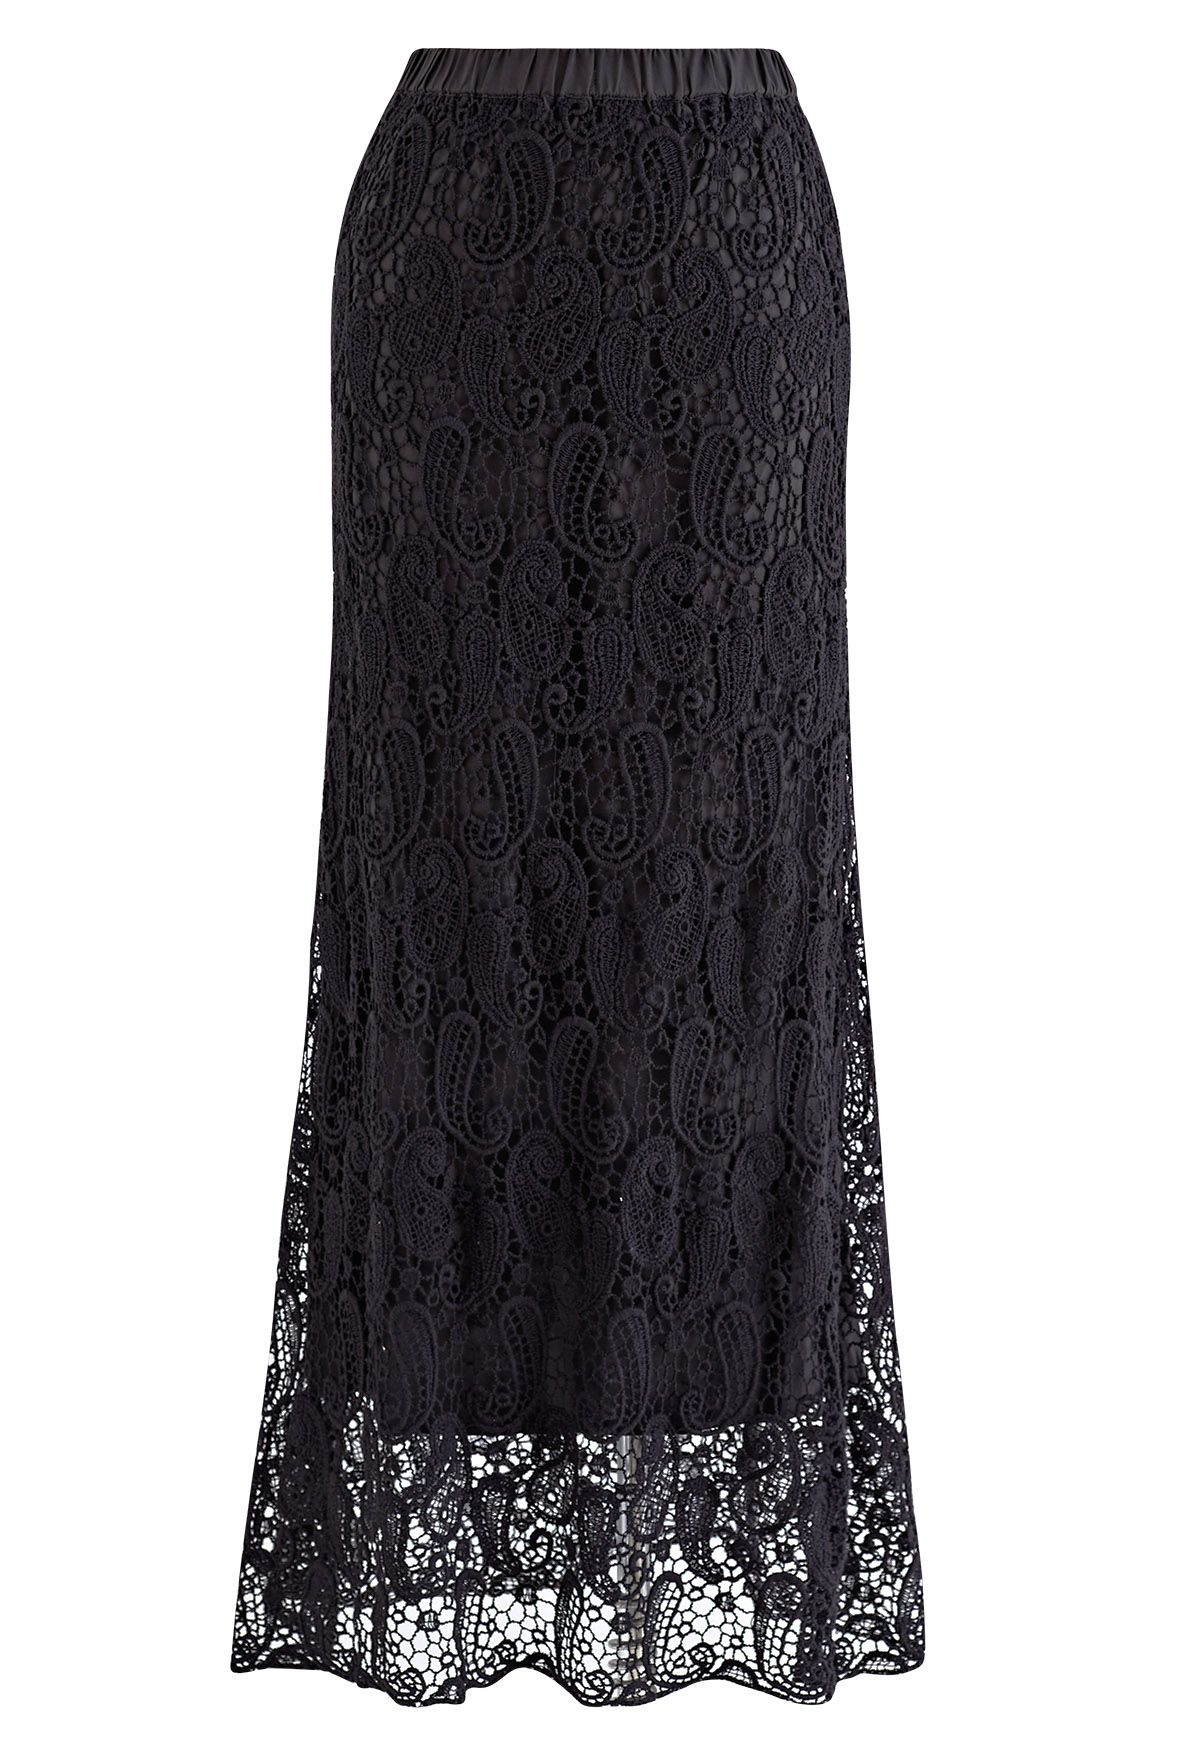 Paisley Cutwork Lace Maxi Skirt in Black